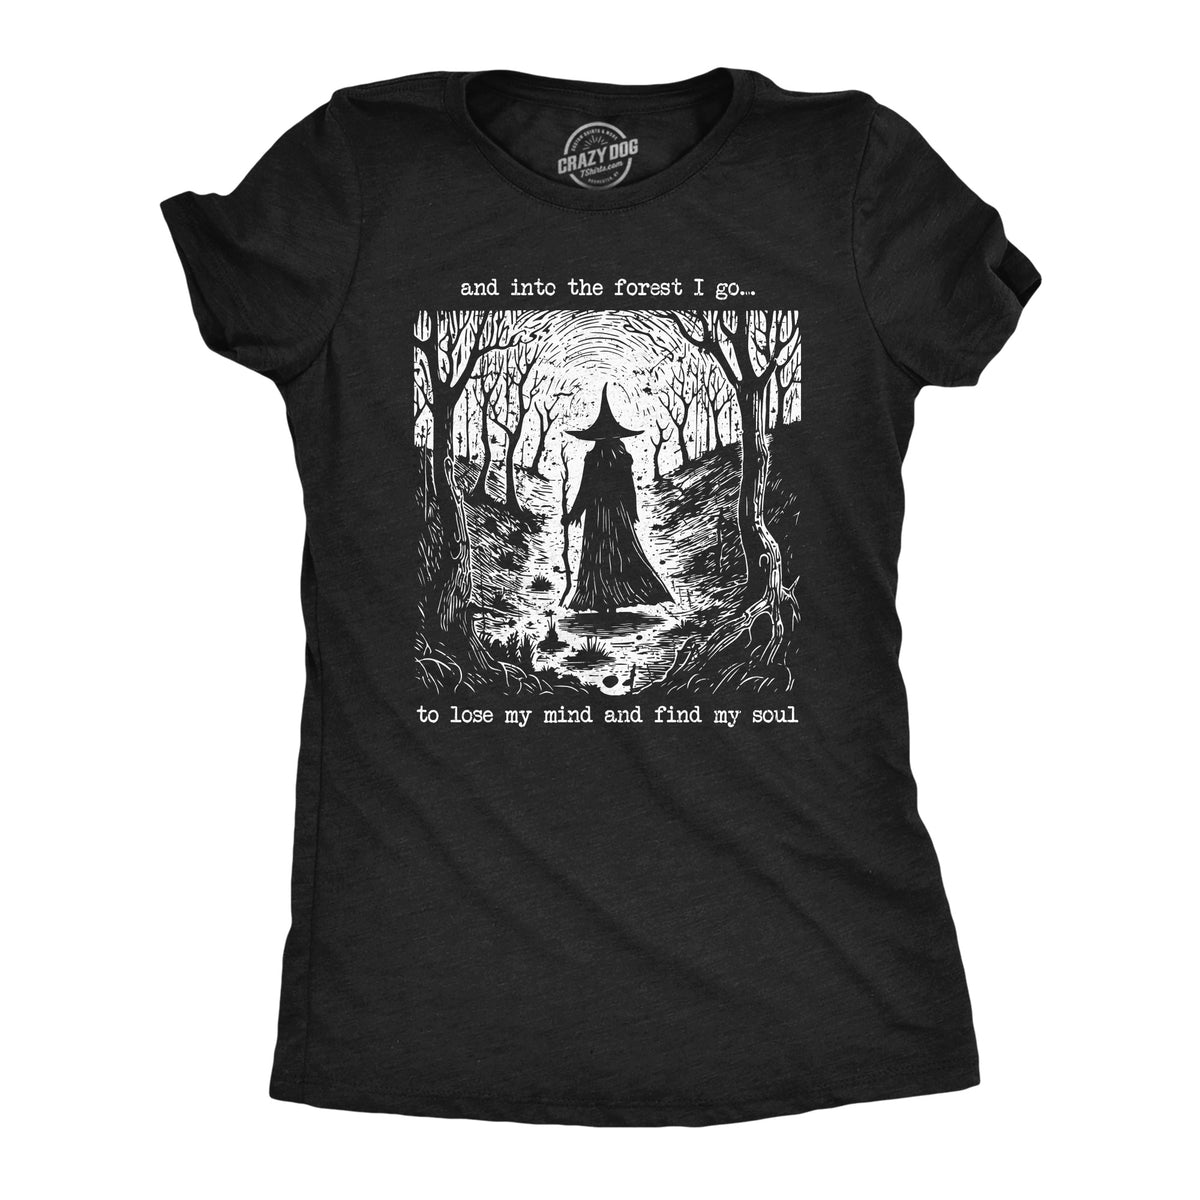 Funny Heather Black - Into The Forest I Go And Into The Forest I Go To Lose My Mind And Find My Soul Womens T Shirt Nerdy Sarcastic Tee